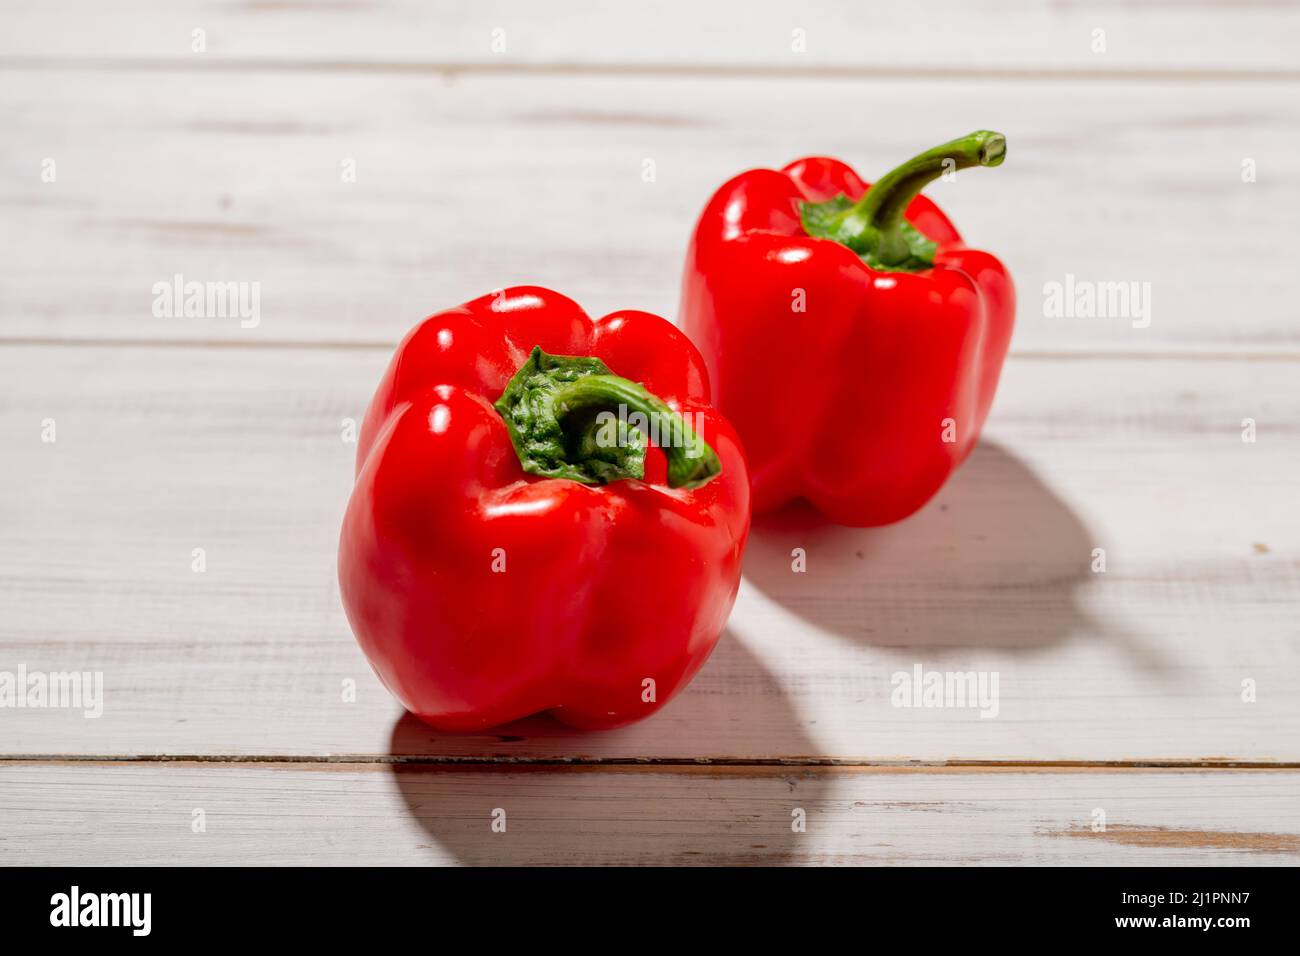 Two red sweet peppers on a wooden background. Light background. Food, vegetarian concept. Stock Photo